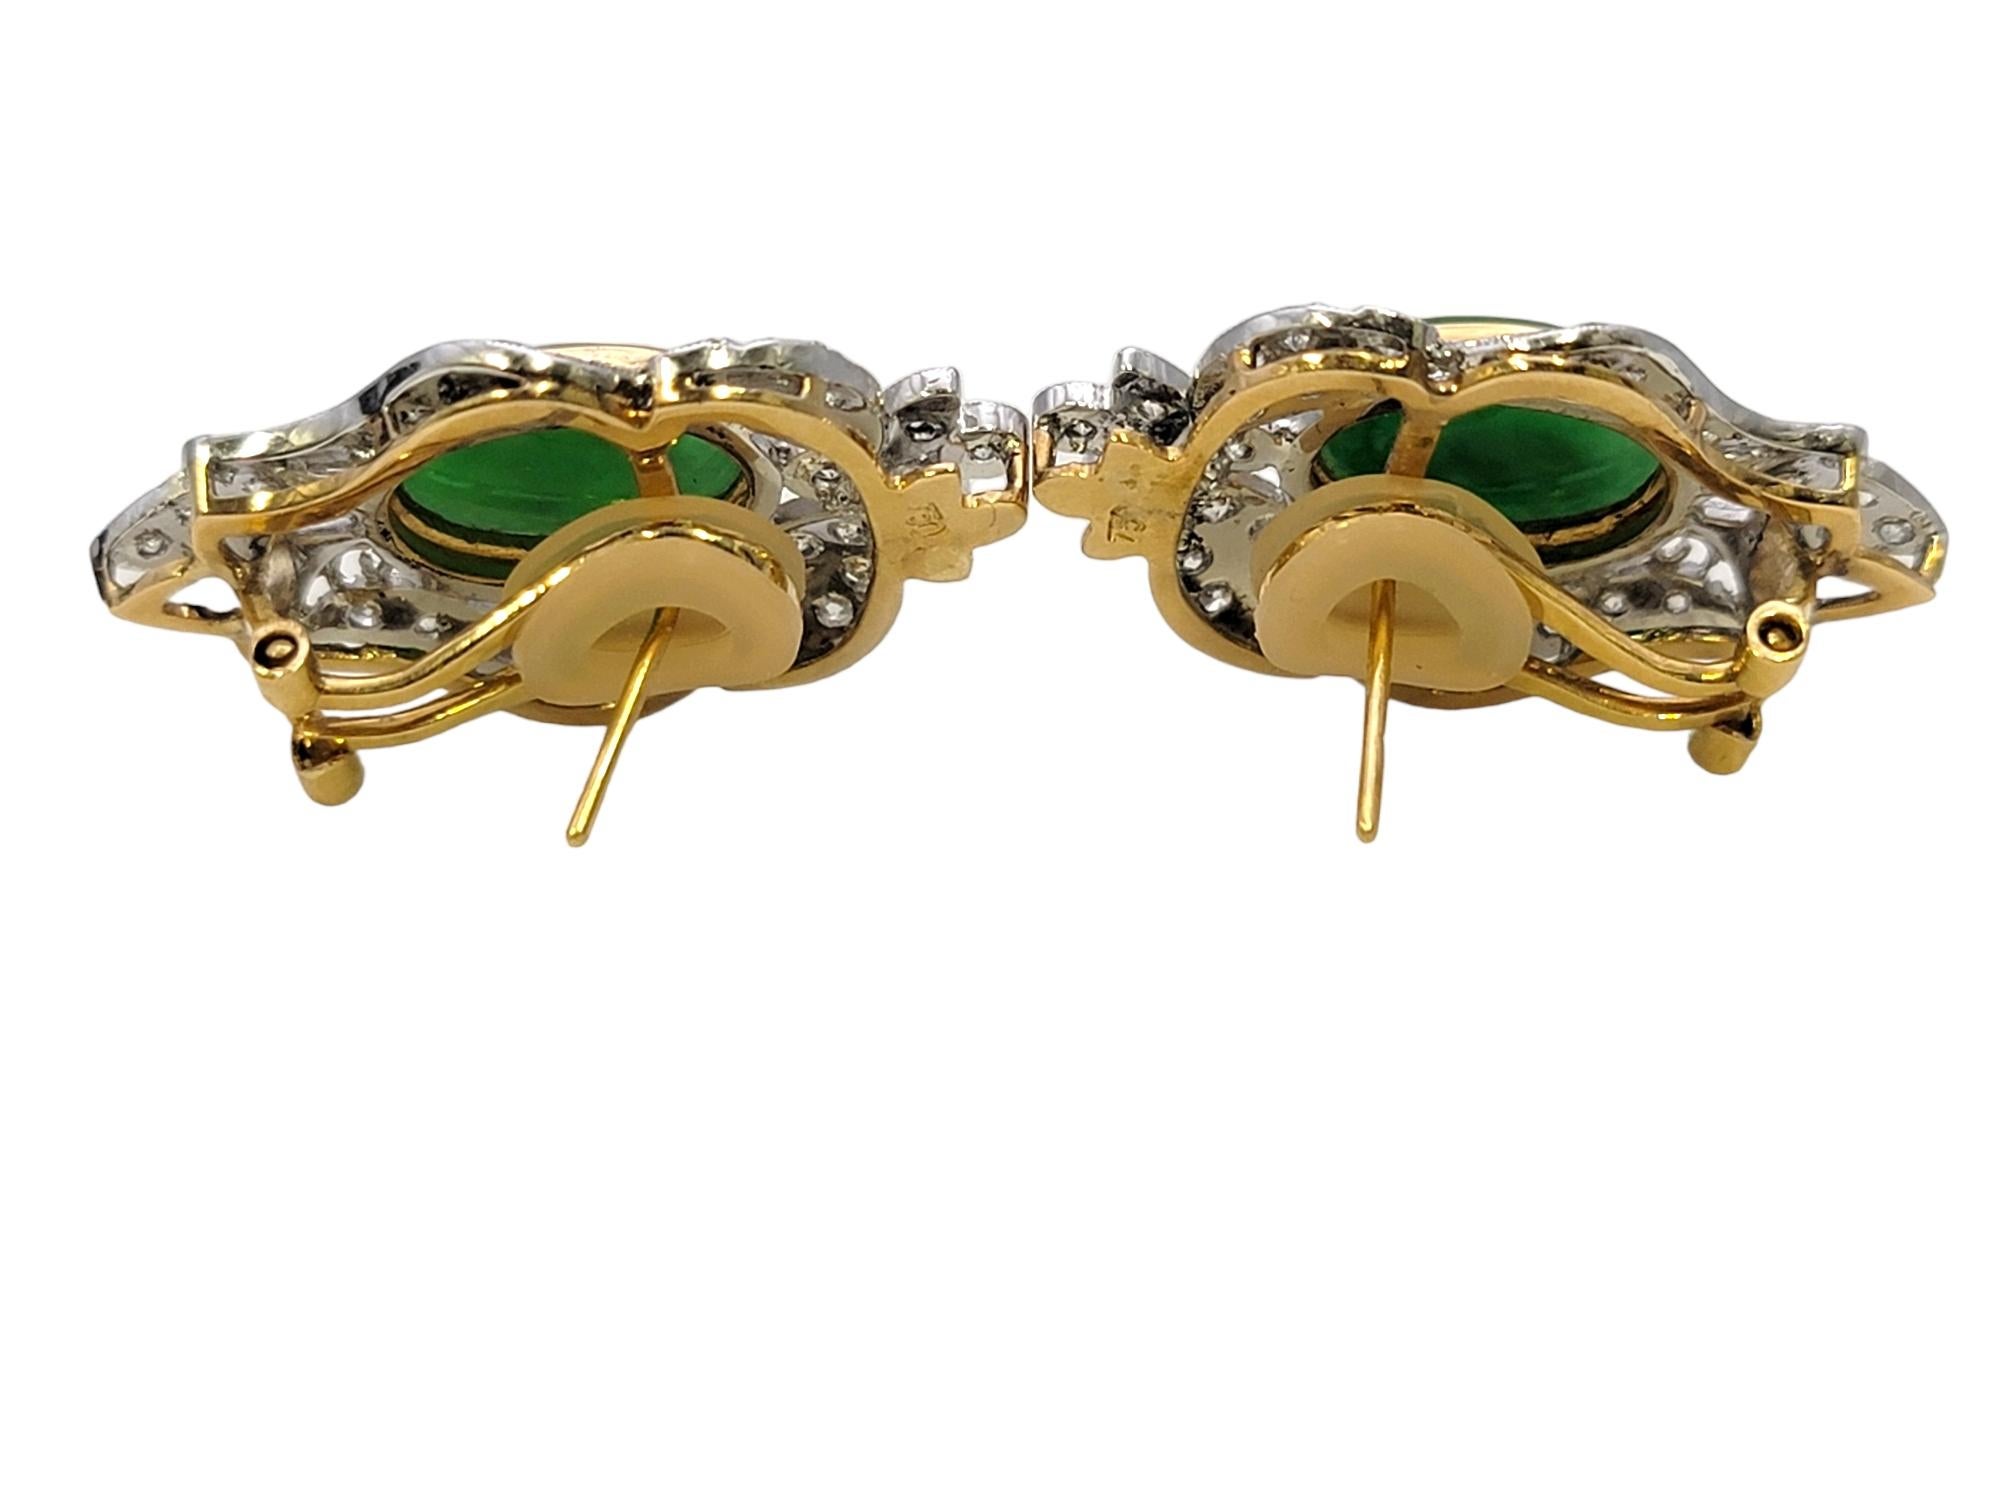 Vintage Style Cabochon Jade and Pave Diamond Pierced Earrings in 18 Karat Gold In Good Condition For Sale In Scottsdale, AZ